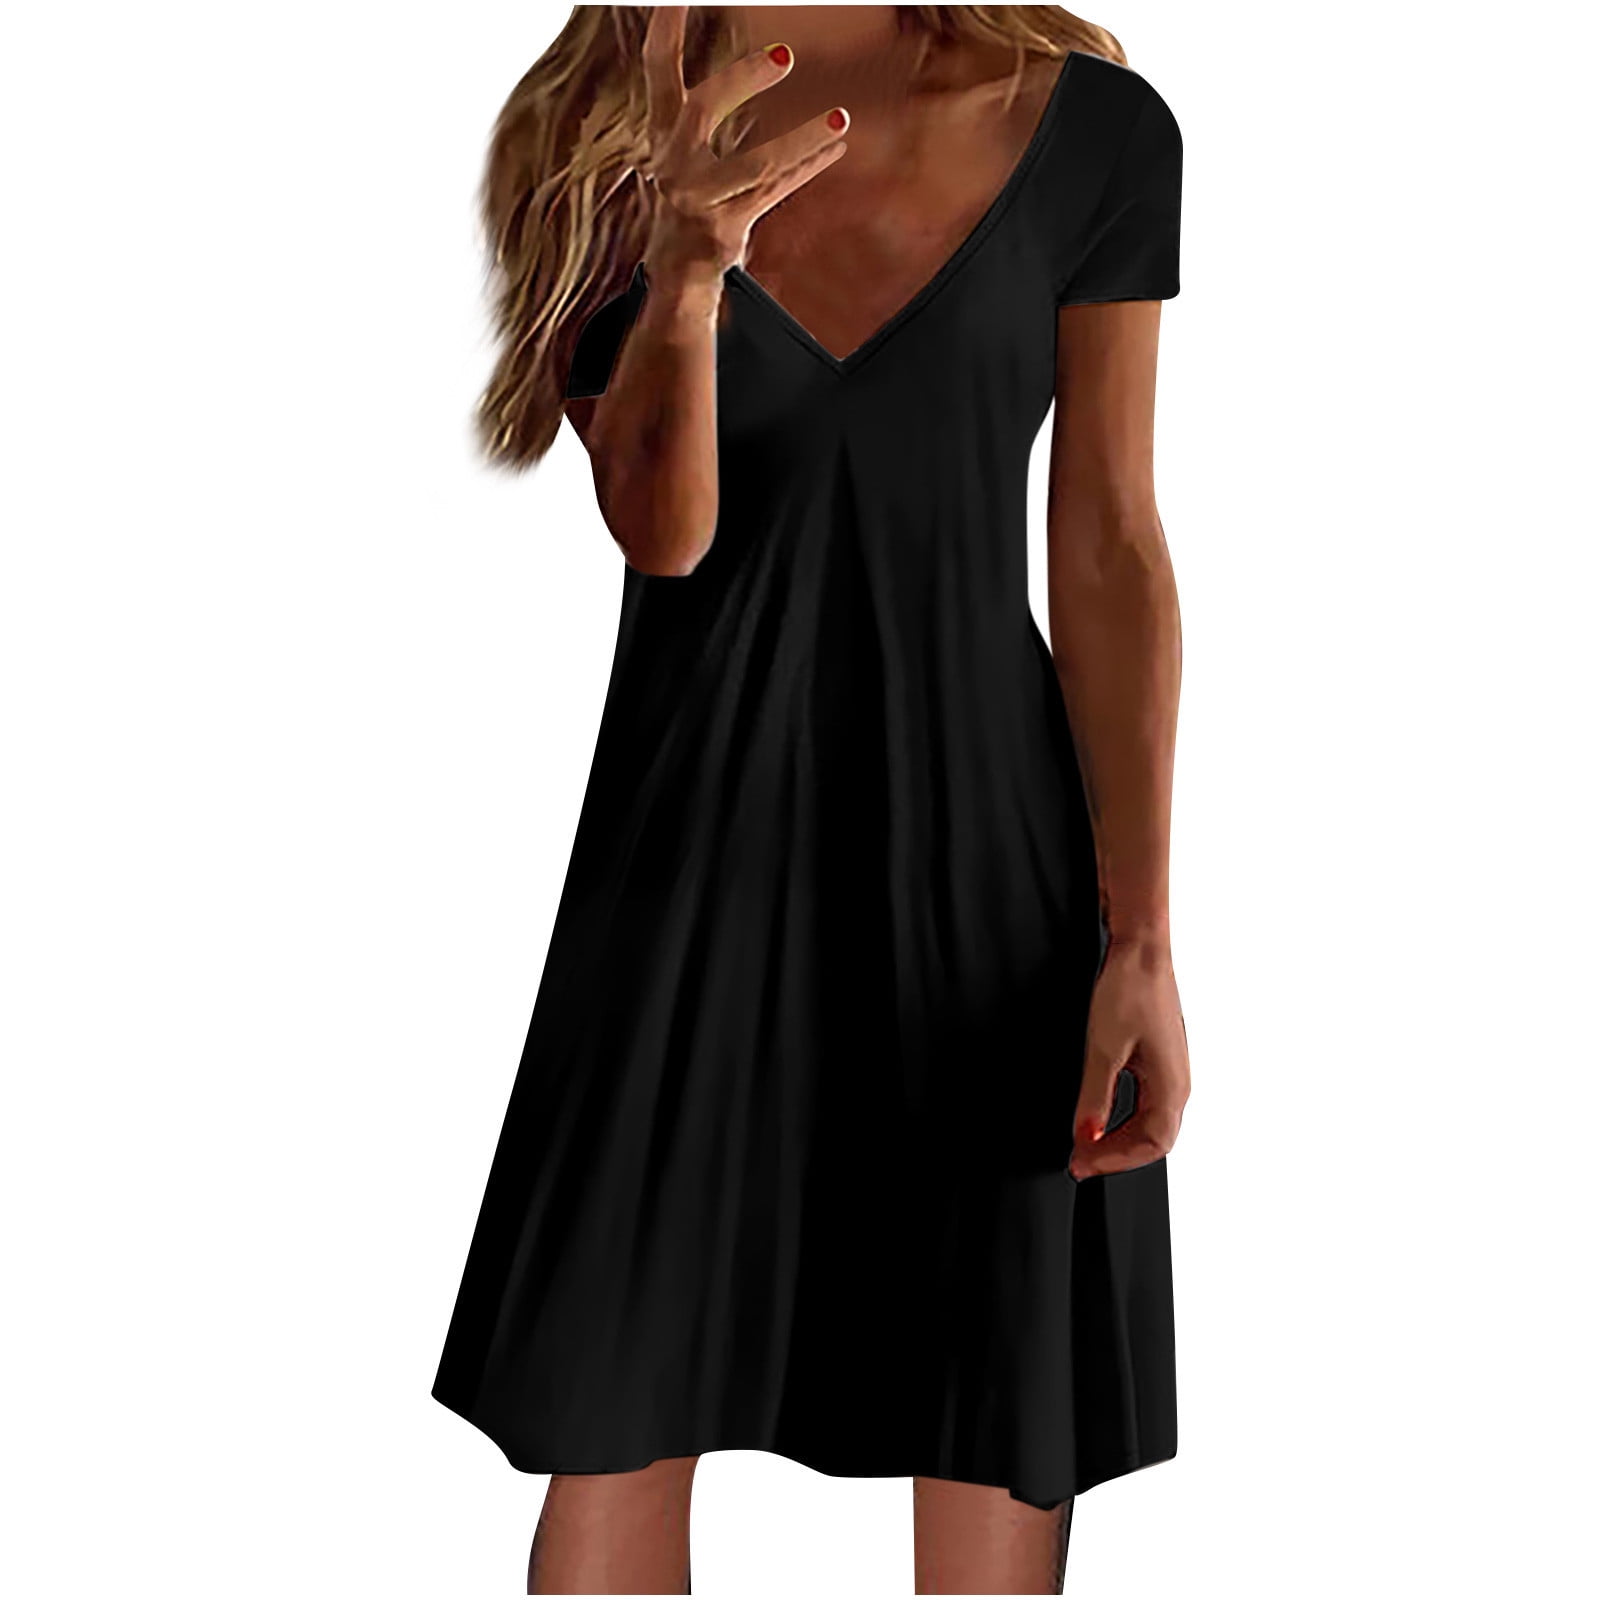 Finelylove Sundresse For Woman Dresses That Hide Belly Fat V-Neck Printed  Short Sleeve Bodycon Black 